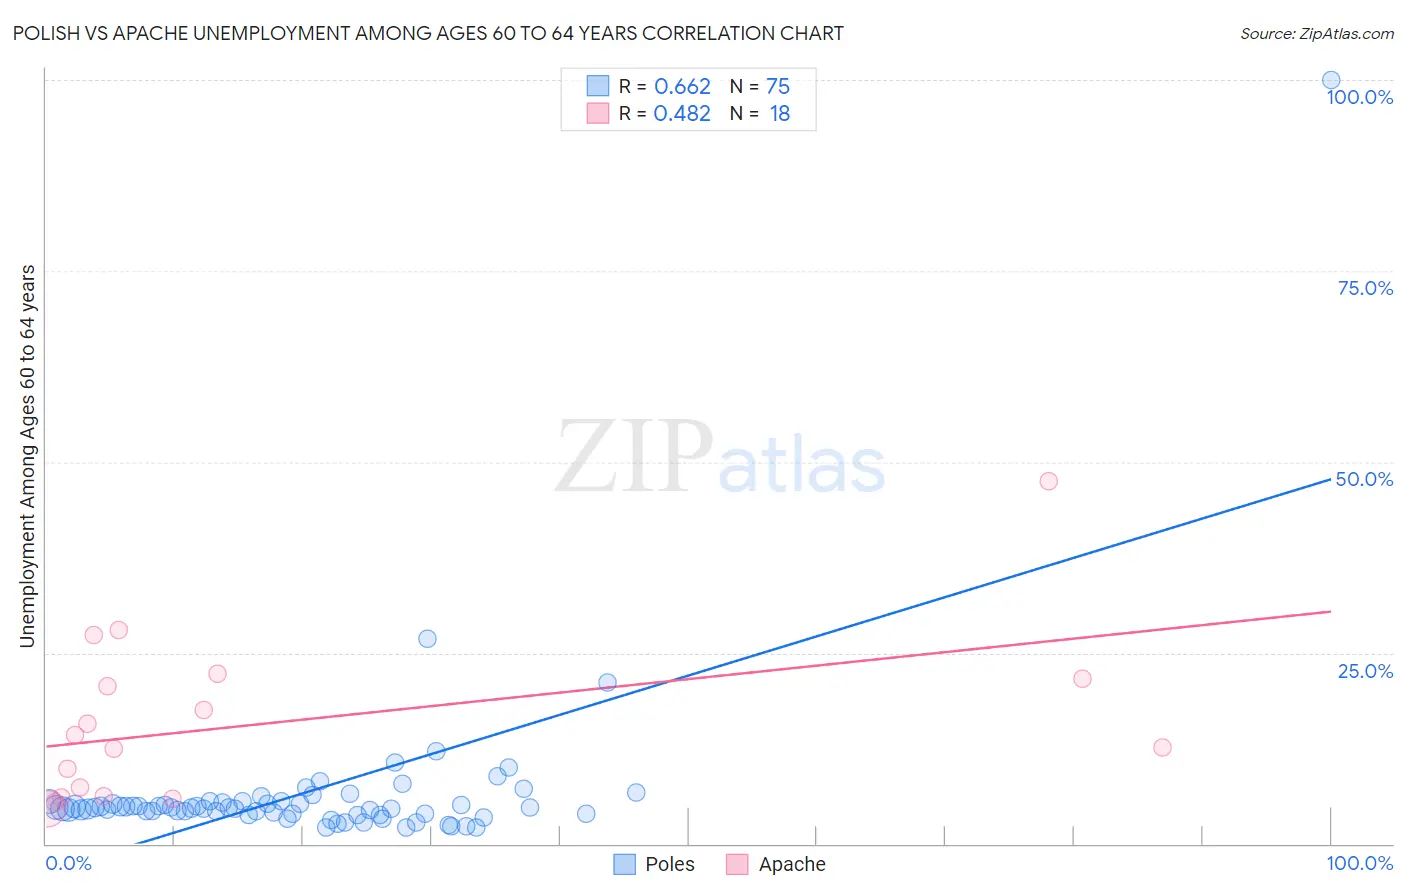 Polish vs Apache Unemployment Among Ages 60 to 64 years